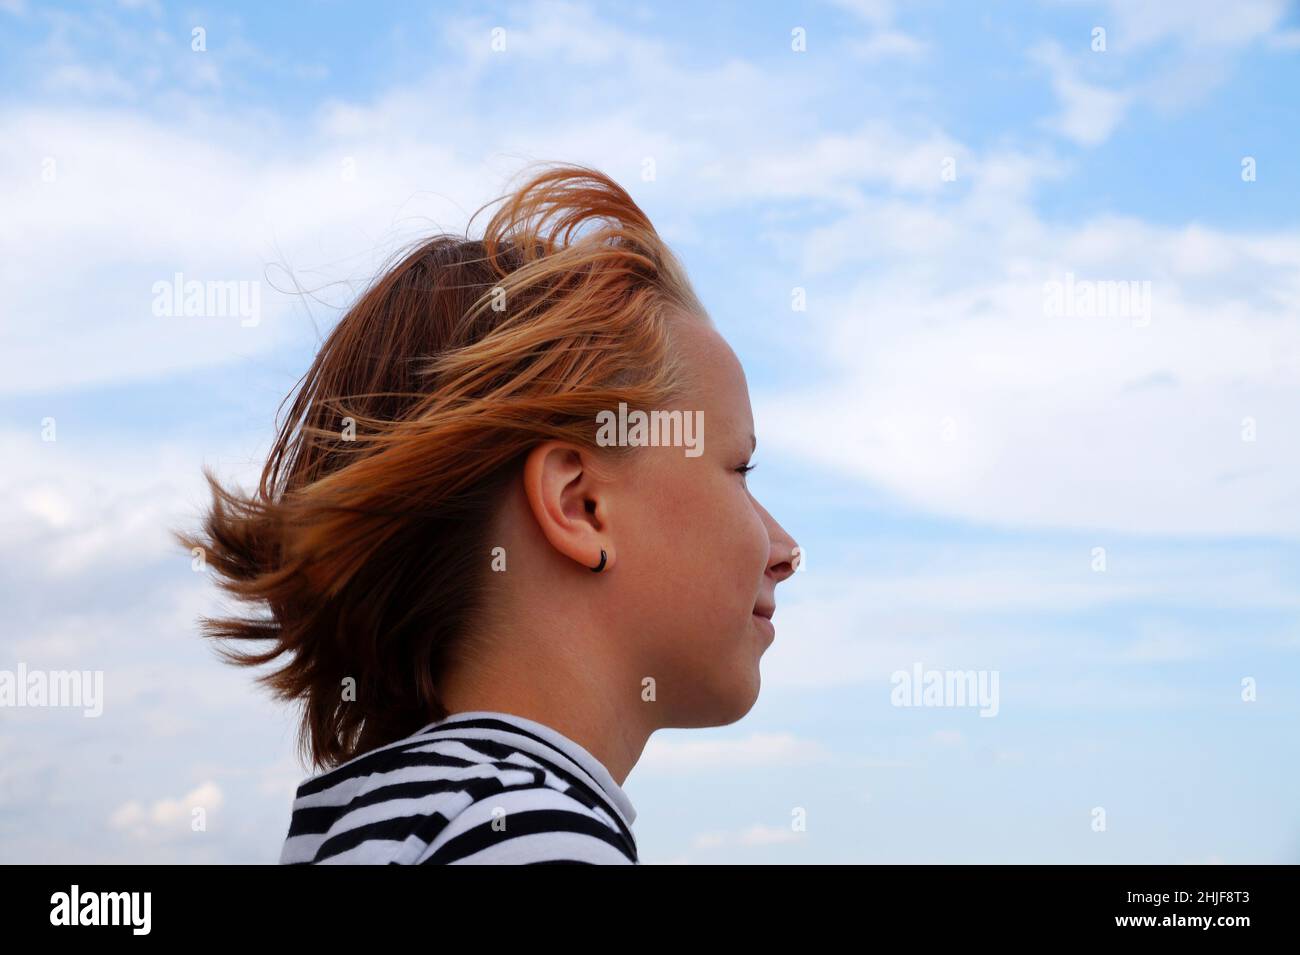 profile of a smiling red-haired teenage girl against a cloudy sky. Stock Photo